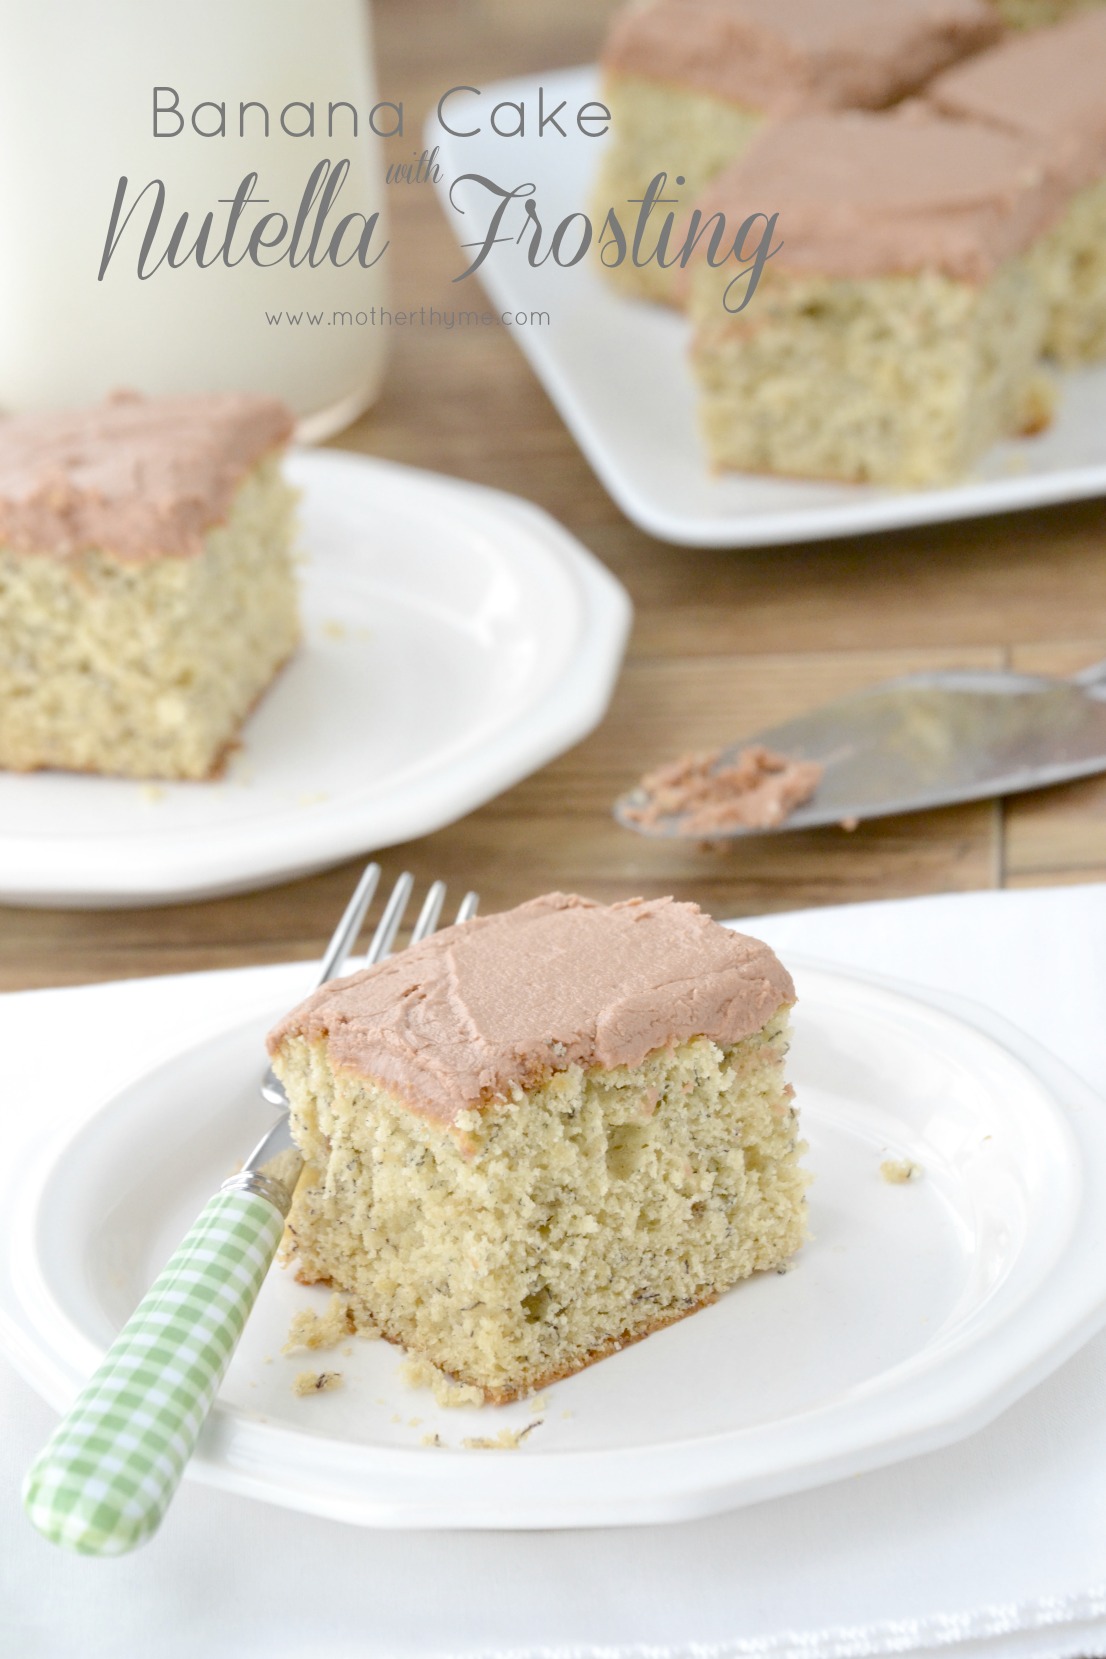 Banana Cake with Nutella Frosting